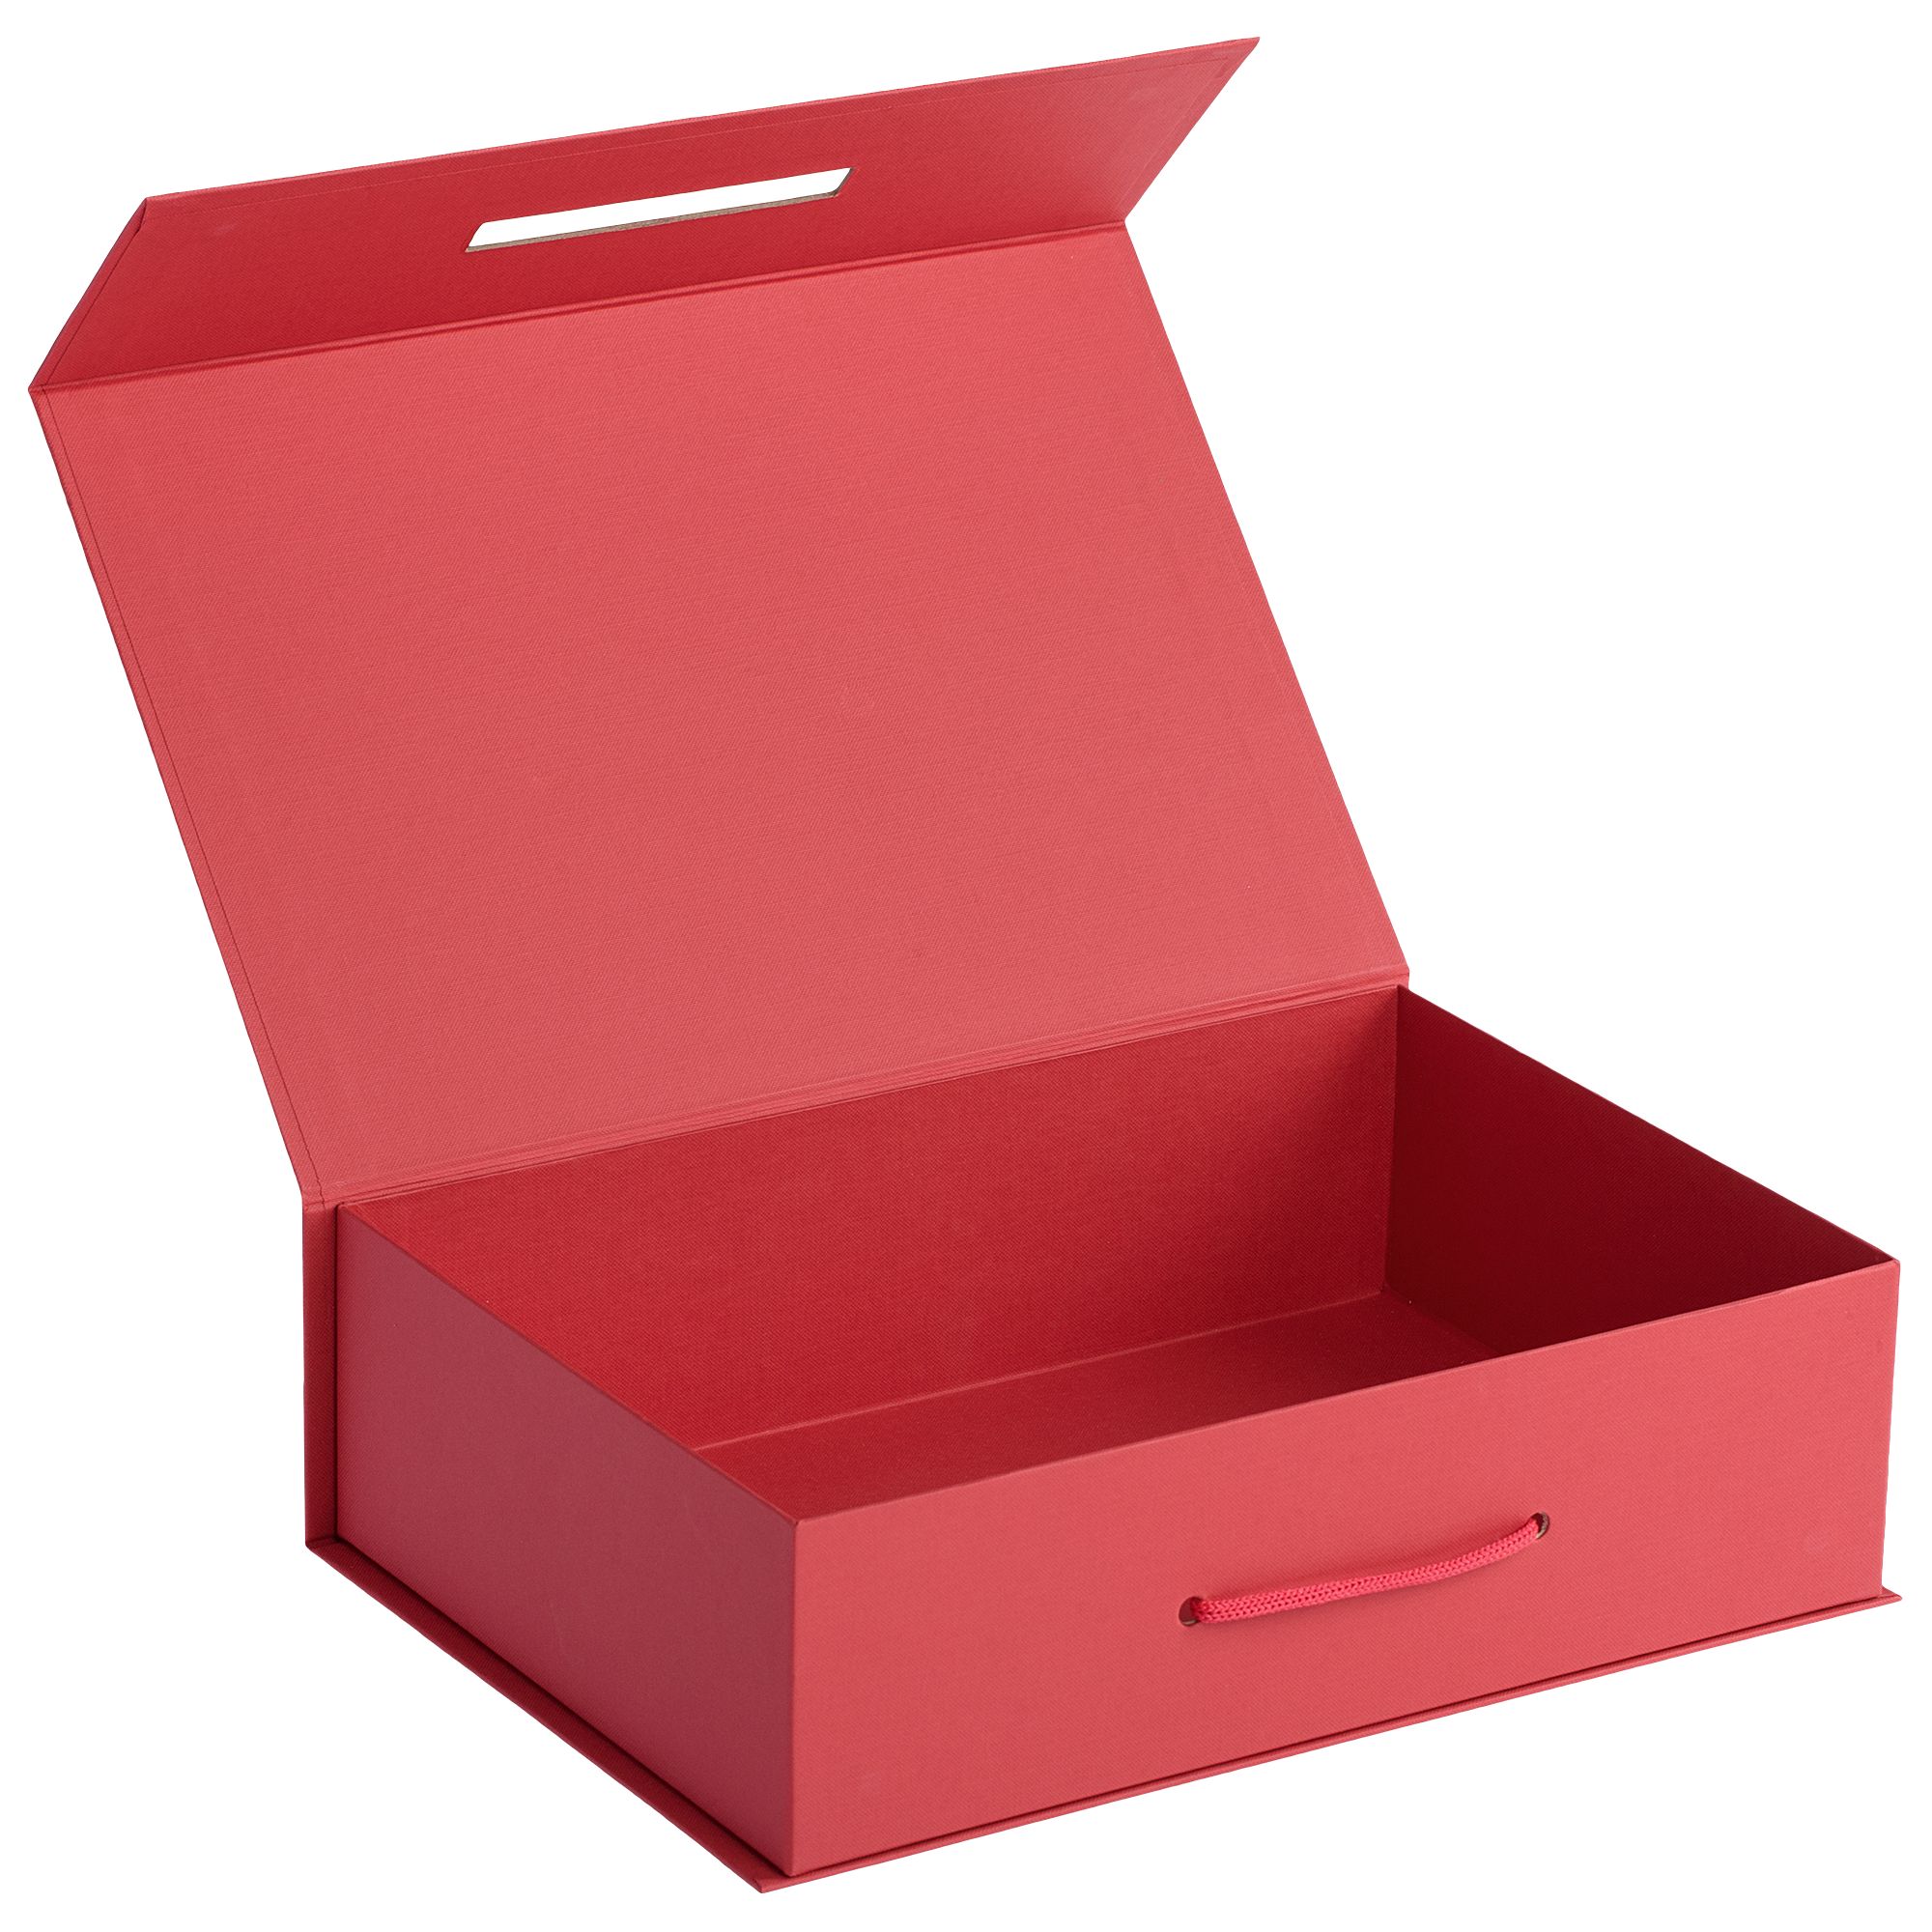 Enhance Unboxing Experiences by Revealing Creative Packaging Inserts for Boxes